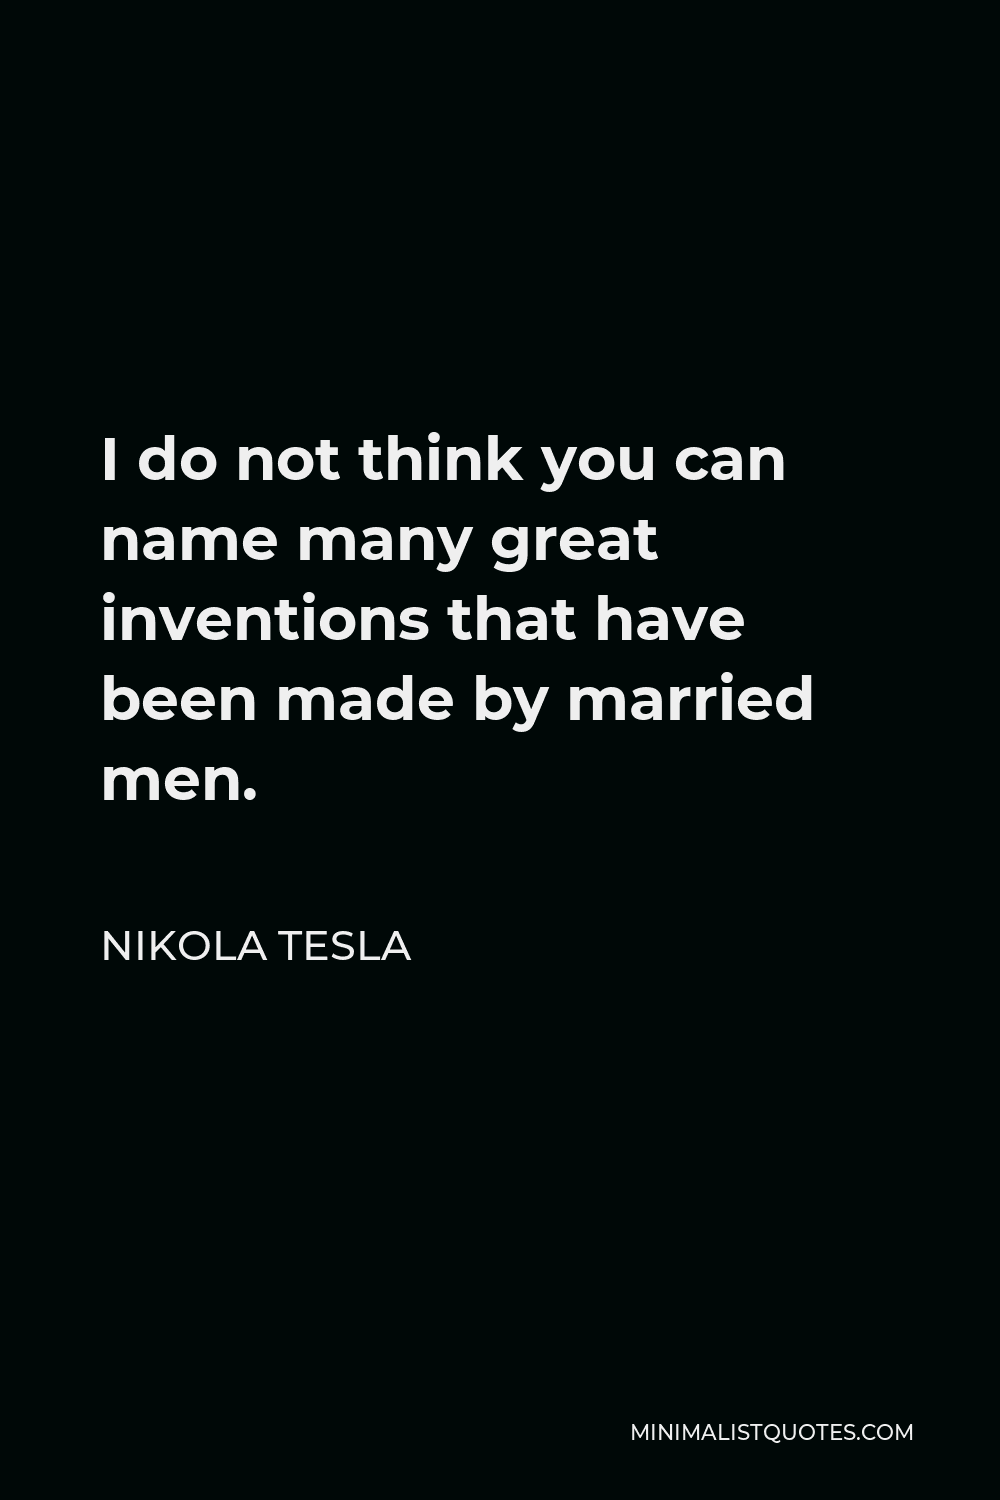 Nikola Tesla Quote - I do not think you can name many great inventions that have been made by married men.